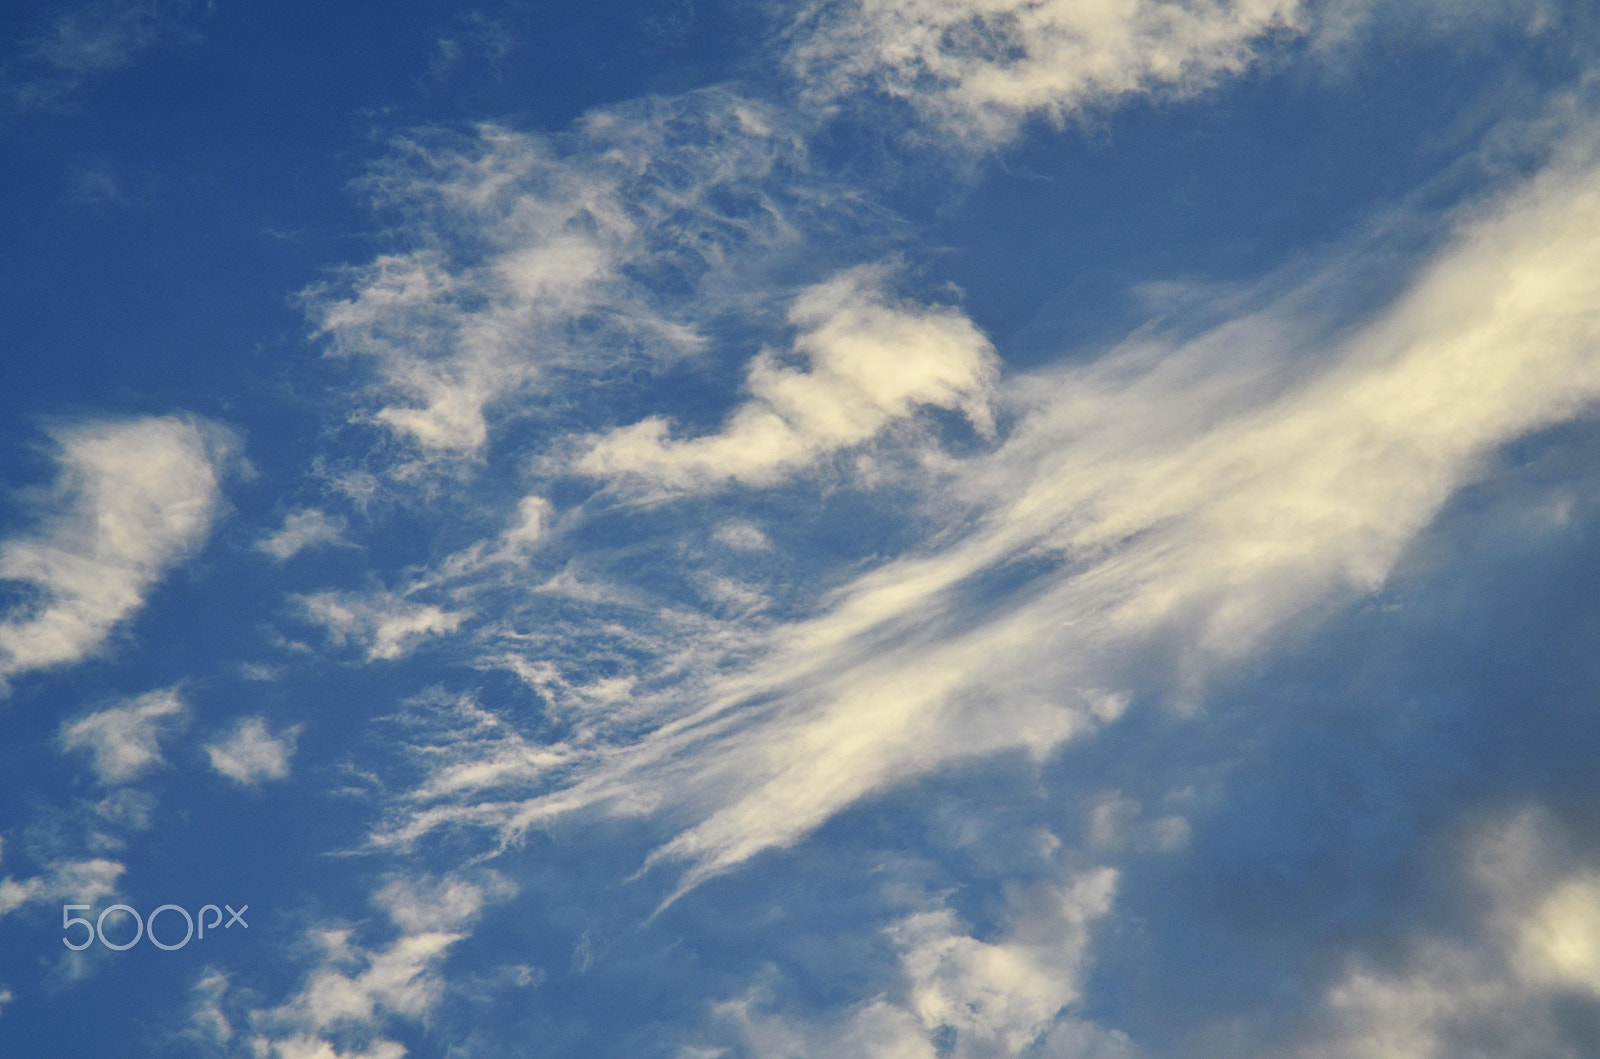 Nikon D5100 + Sigma 28-105mm F2.8-4 Aspherical sample photo. The clouds photography